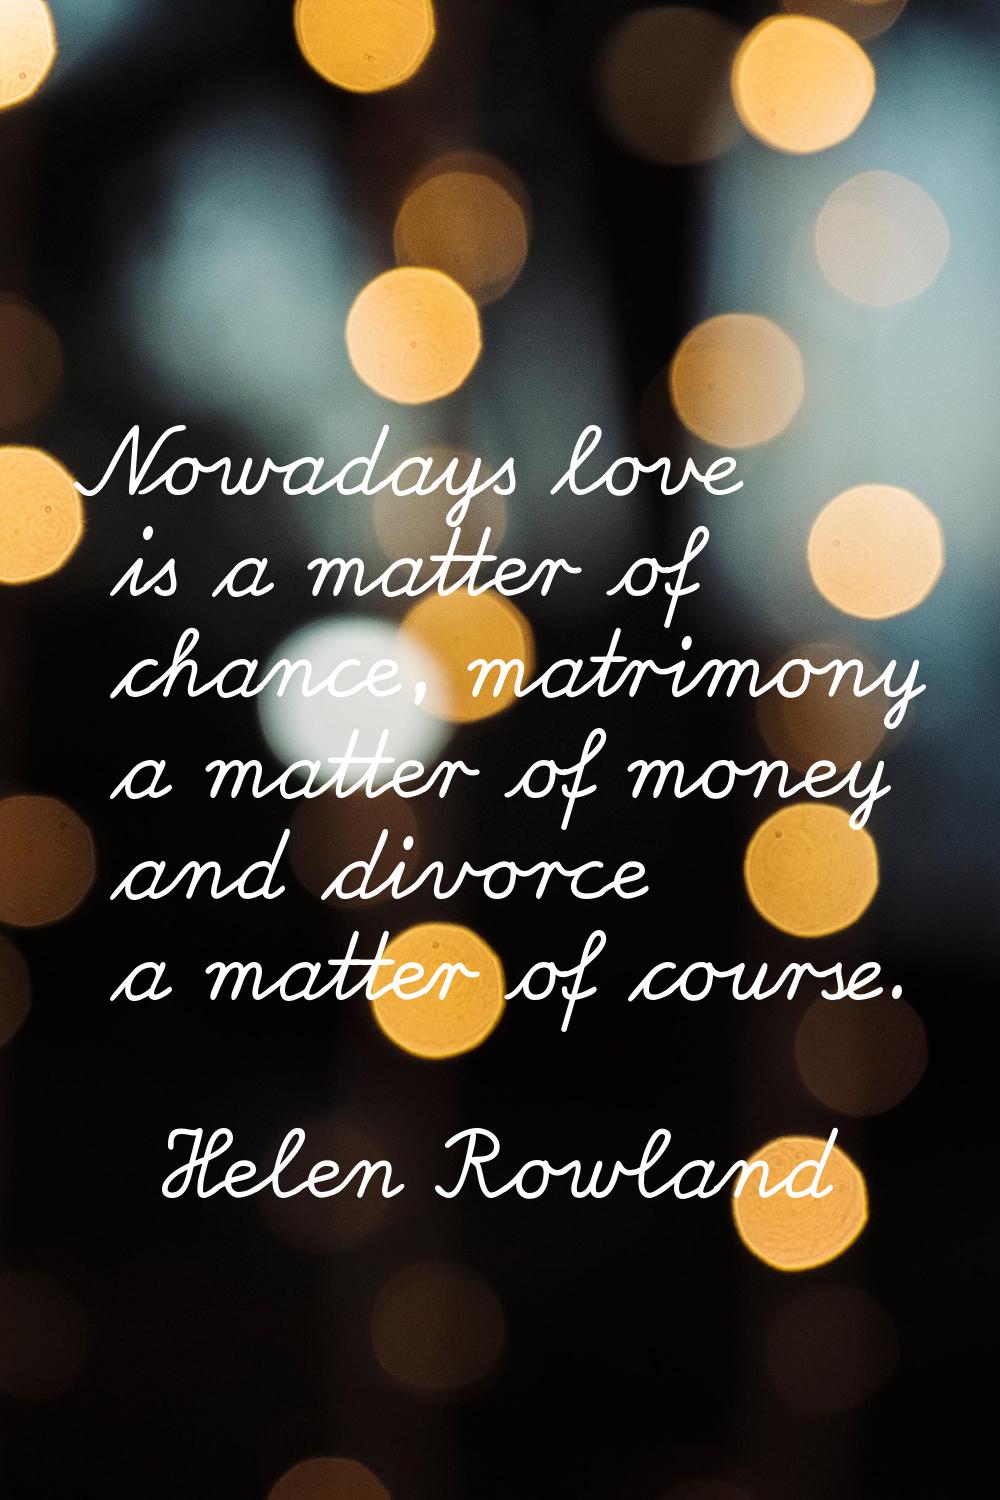 Nowadays love is a matter of chance, matrimony a matter of money and divorce a matter of course.